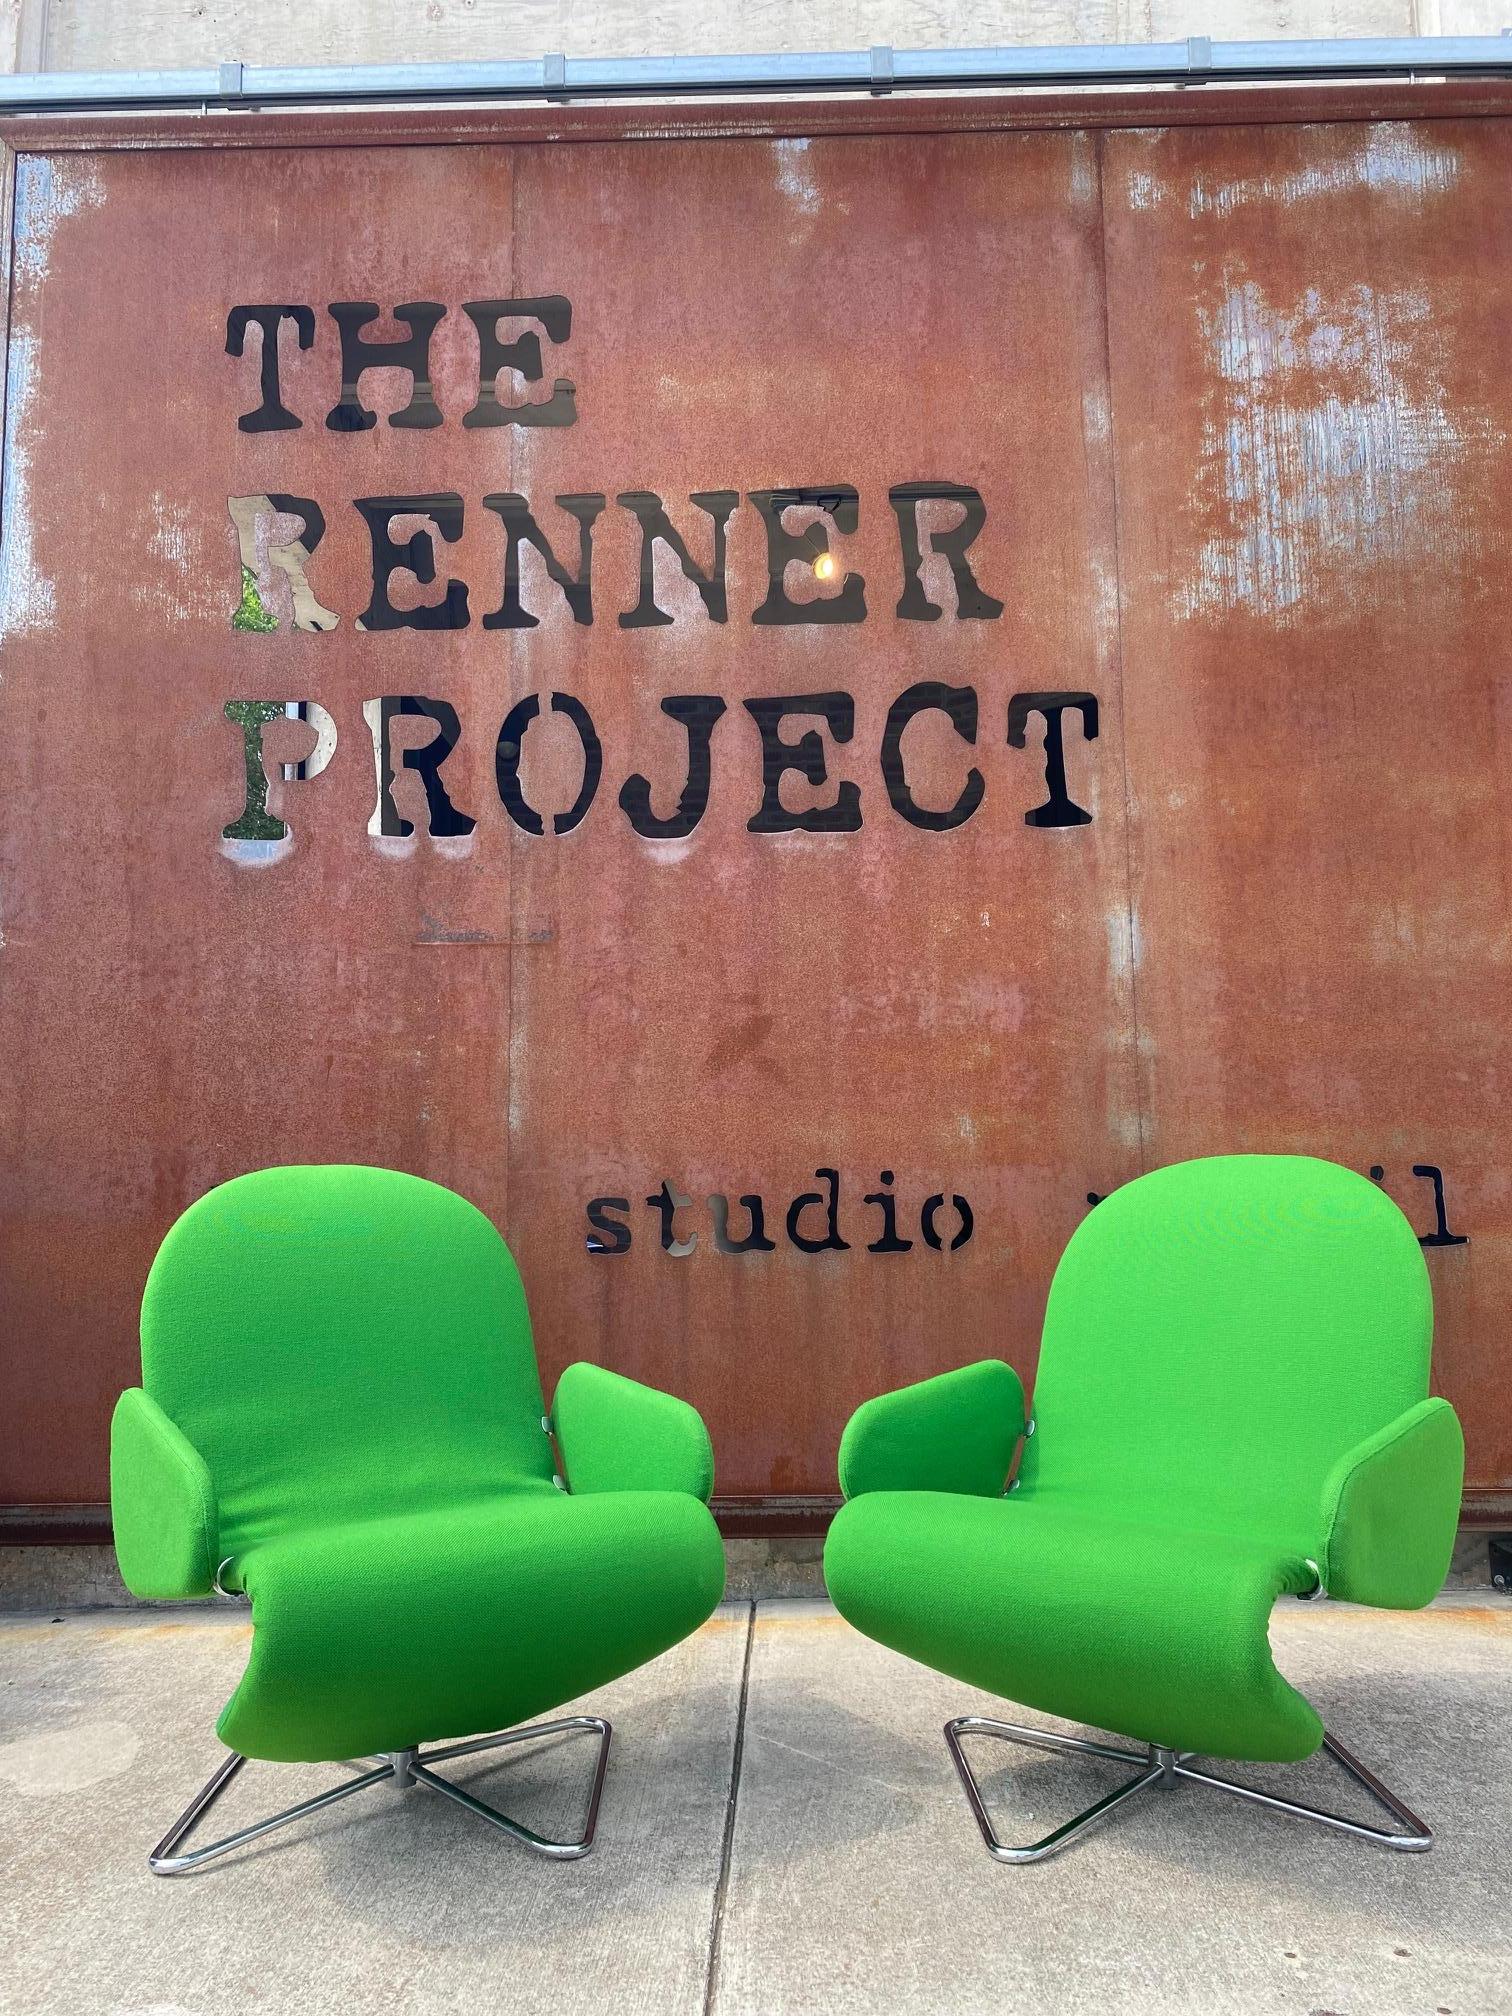 Matched pair of original Verner Panton System 123 swivel chairs for Fritz Hansen. Low lounge profile chairs swivel on tubular chromed metal bases. Kelly green woven wool fabric is not original yet looks period and is in excellent condition. Chairs